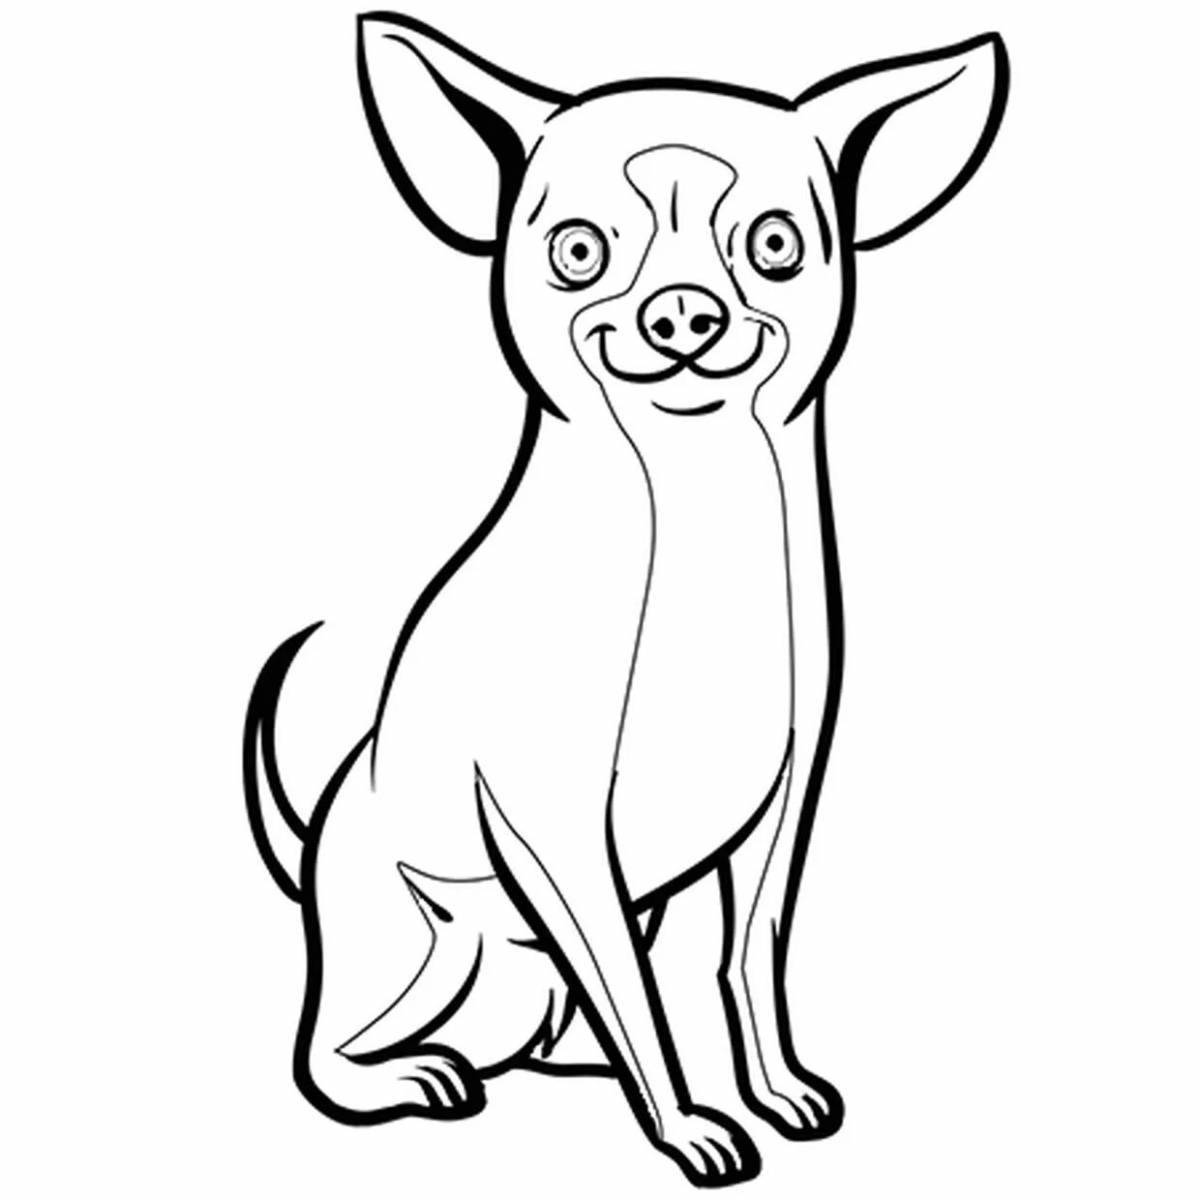 Playful chihuahua coloring page